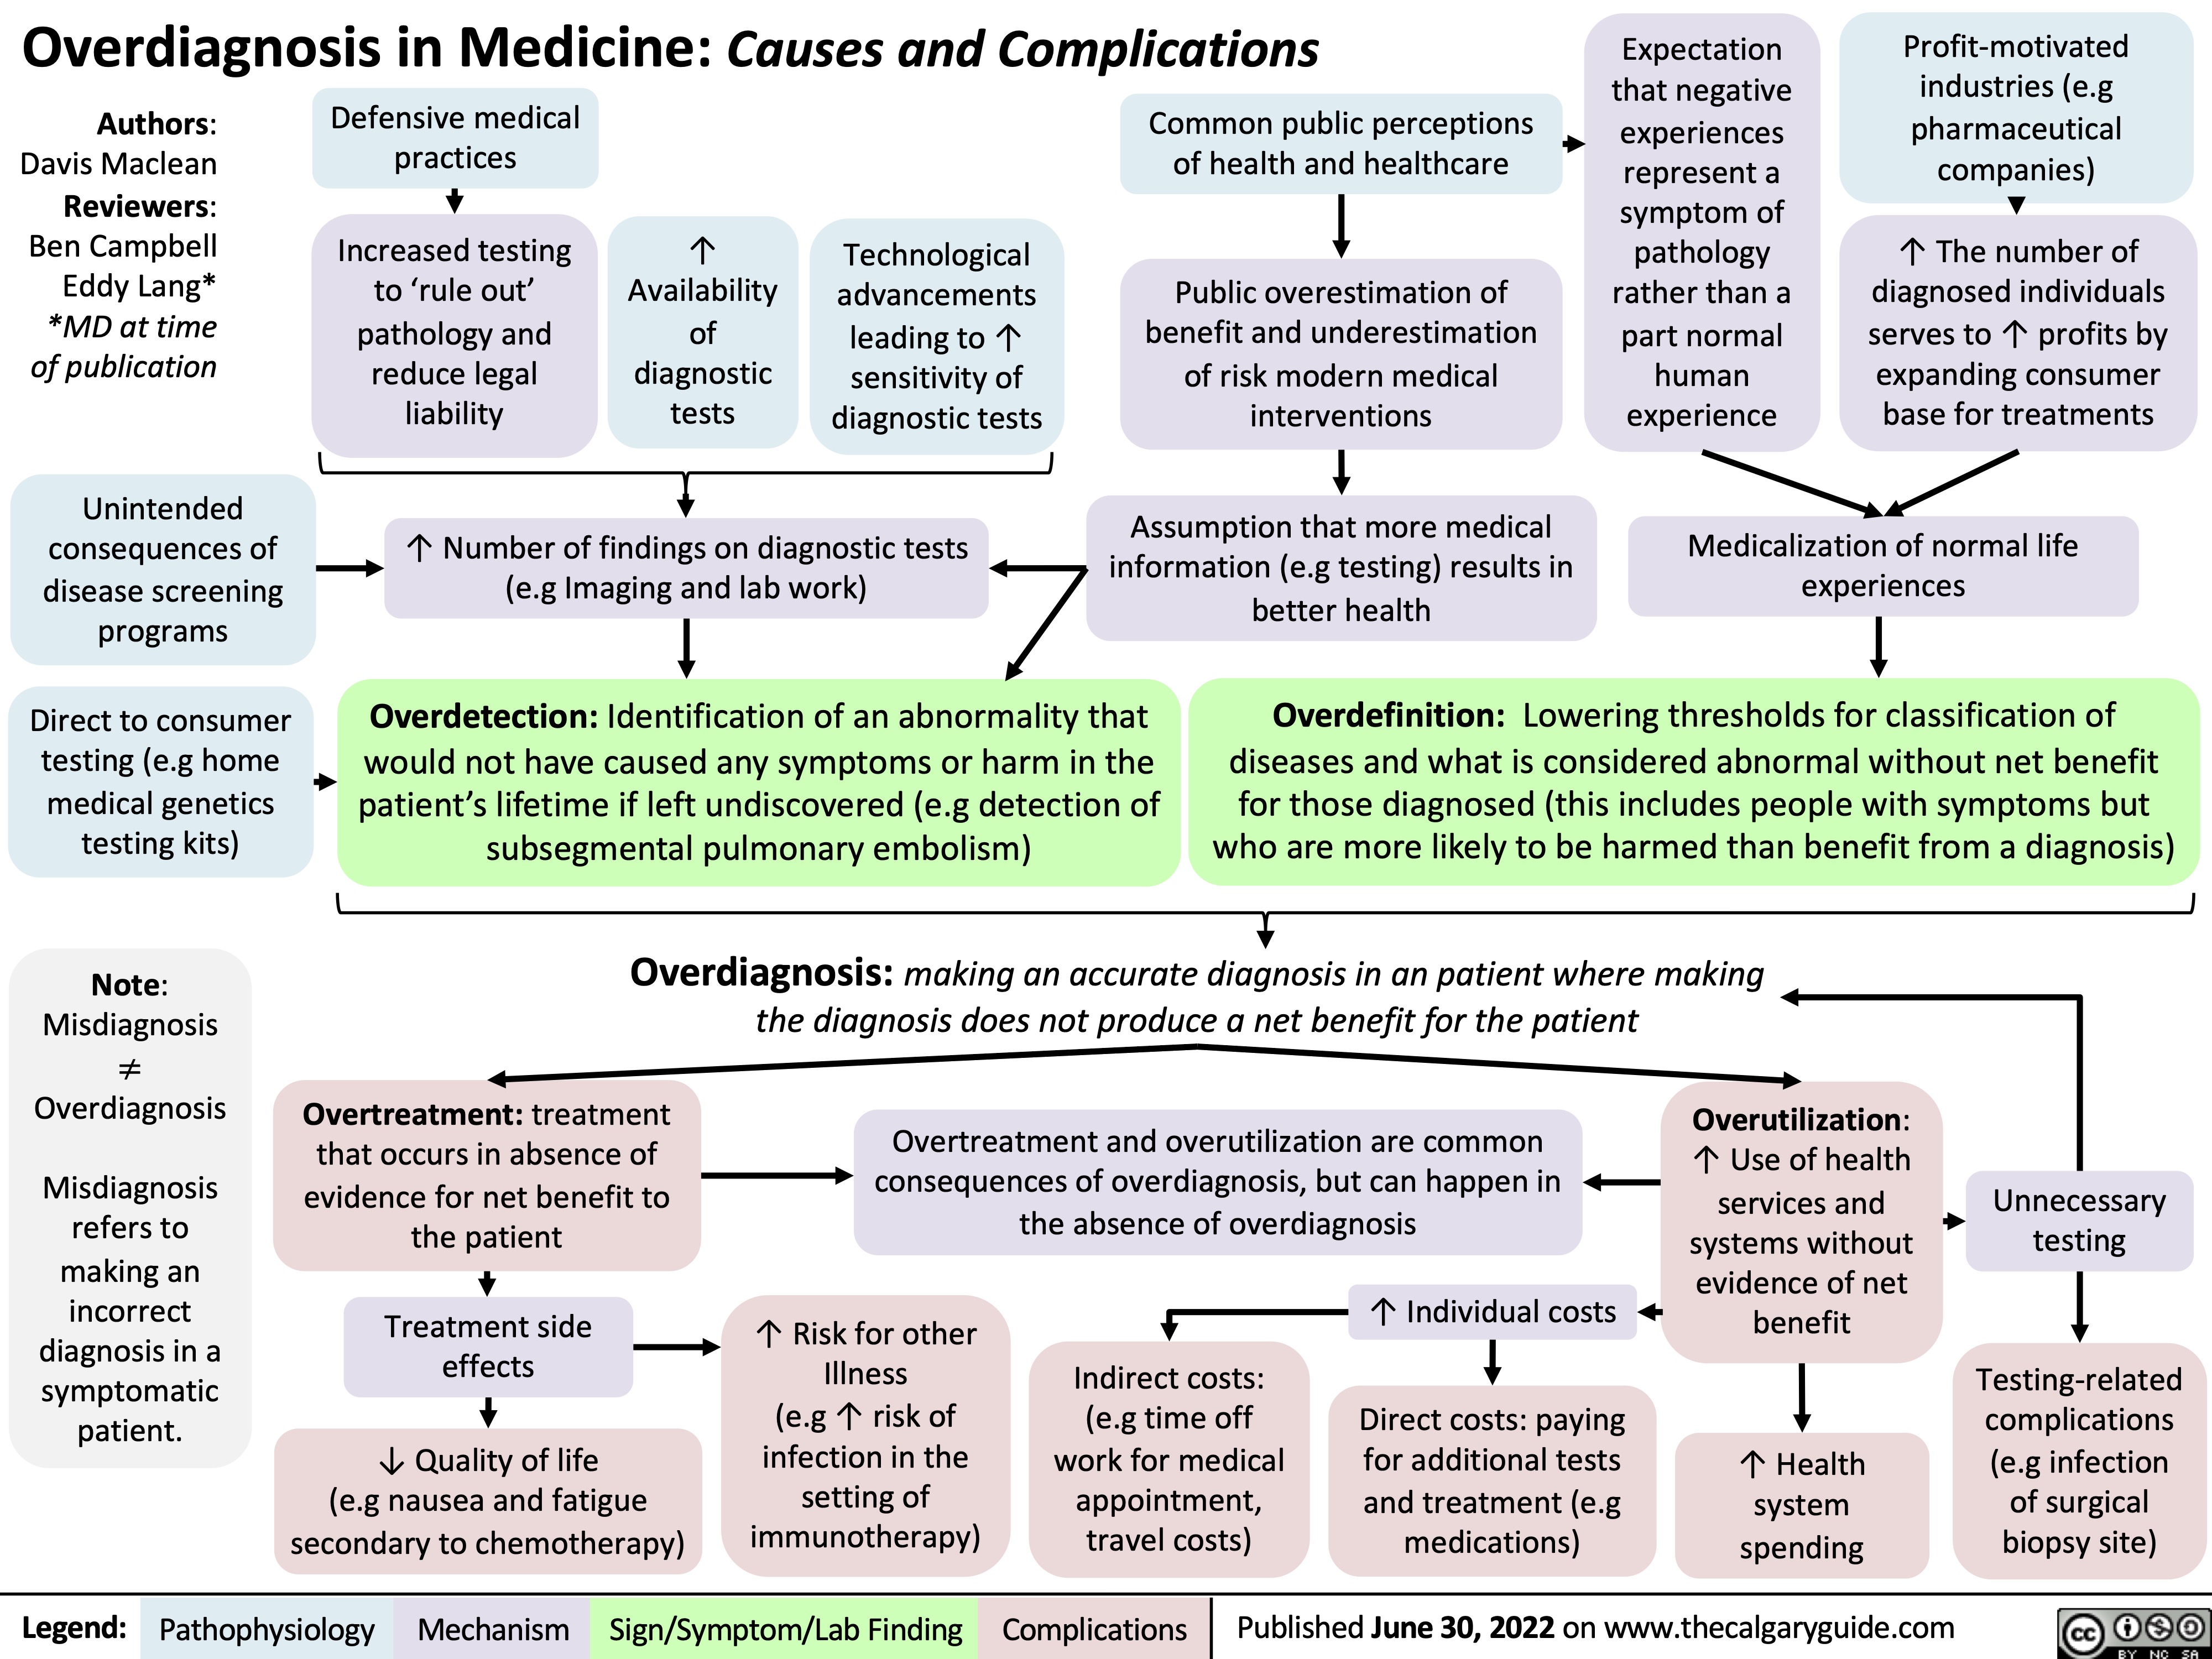 Overdiagnosis in Medicine: Causes and Complications
Expectation that negative experiences represent a symptom of pathology rather than a part normal human experience
Profit-motivated industries (e.g pharmaceutical companies)
↑ The number of diagnosed individuals serves to ↑ profits by expanding consumer base for treatments
    Authors: Davis Maclean Reviewers: Ben Campbell Eddy Lang* *MD at time of publication
Unintended consequences of disease screening programs
Direct to consumer testing (e.g home medical genetics testing kits)
Note: Misdiagnosis ≠ Overdiagnosis
Misdiagnosis refers to making an incorrect diagnosis in a symptomatic patient.
Defensive medical practices
Increased testing to ‘rule out’ pathology and reduce legal liability
↑
Availability of diagnostic tests
Technological advancements leading to ↑ sensitivity of diagnostic tests
Common public perceptions of health and healthcare
Public overestimation of benefit and underestimation of risk modern medical interventions
Assumption that more medical information (e.g testing) results in better health
            ↑ Number of findings on diagnostic tests (e.g Imaging and lab work)
Medicalization of normal life experiences
    Overdetection: Identification of an abnormality that would not have caused any symptoms or harm in the patient’s lifetime if left undiscovered (e.g detection of subsegmental pulmonary embolism)
Overdefinition: Lowering thresholds for classification of diseases and what is considered abnormal without net benefit
for those diagnosed (this includes people with symptoms but who are more likely to be harmed than benefit from a diagnosis)
 Overdiagnosis: making an accurate diagnosis in an patient where making the diagnosis does not produce a net benefit for the patient
     Overtreatment: treatment that occurs in absence of evidence for net benefit to the patient
Treatment side effects
↓ Quality of life
(e.g nausea and fatigue secondary to chemotherapy)
Overtreatment and overutilization are common consequences of overdiagnosis, but can happen in the absence of overdiagnosis
Overutilization: ↑ Use of health services and systems without evidence of net benefit
↑ Health system spending
Unnecessary testing
Testing-related complications (e.g infection of surgical biopsy site)
       ↑ Risk for other Illness
(e.g ↑ risk of infection in the setting of immunotherapy)
Indirect costs: (e.g time off work for medical appointment, travel costs)
↑ Individual costs
Direct costs: paying for additional tests and treatment (e.g medications)
      Legend:
 Pathophysiology
Mechanism
Sign/Symptom/Lab Finding
 Complications
Published June 30, 2022 on www.thecalgaryguide.com
    